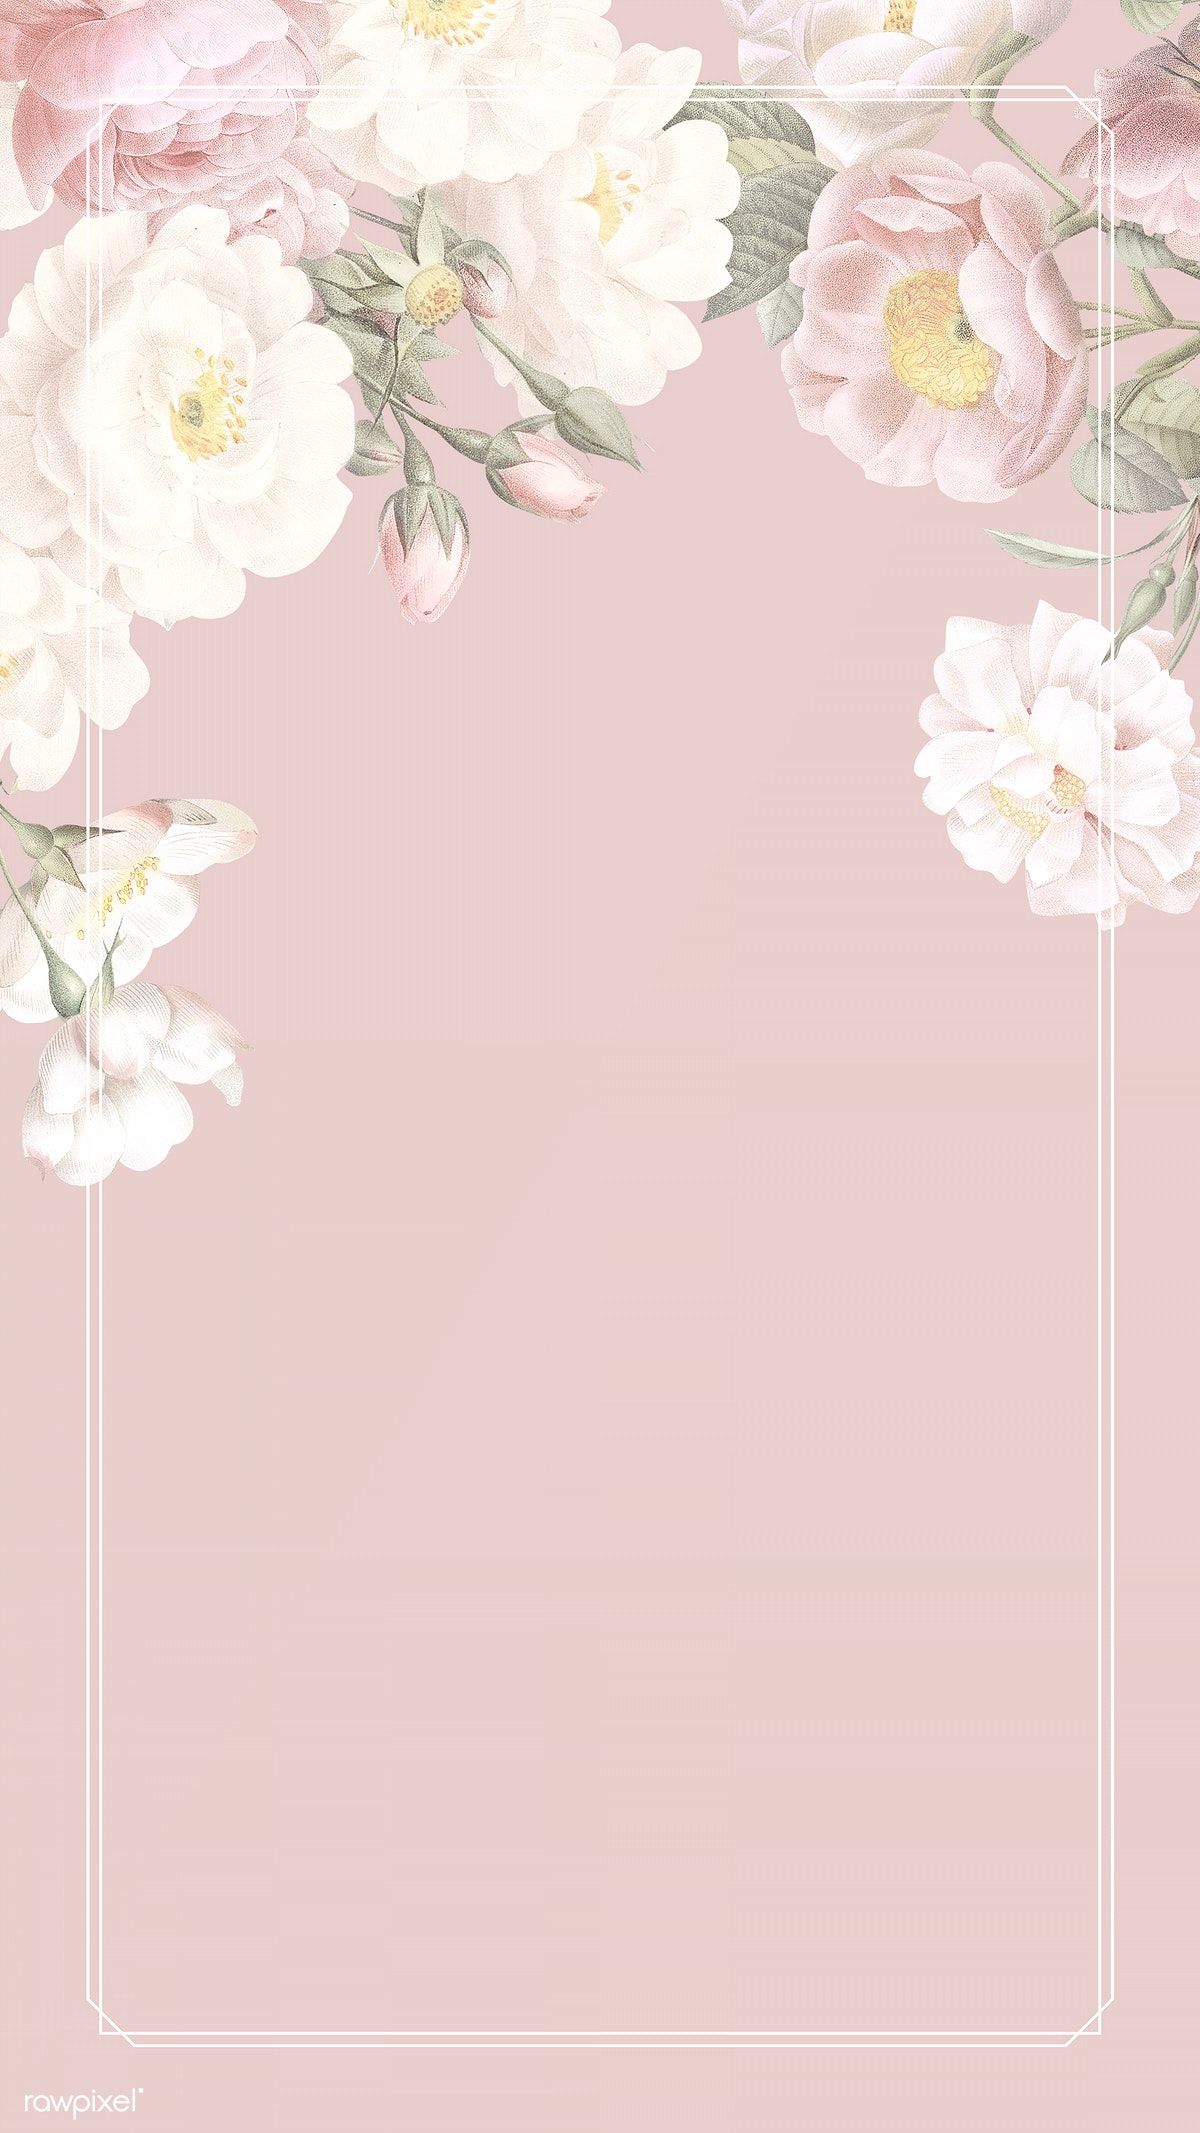 Iphone Pastel Floral Wallpaper Hd , HD Wallpaper & Backgrounds